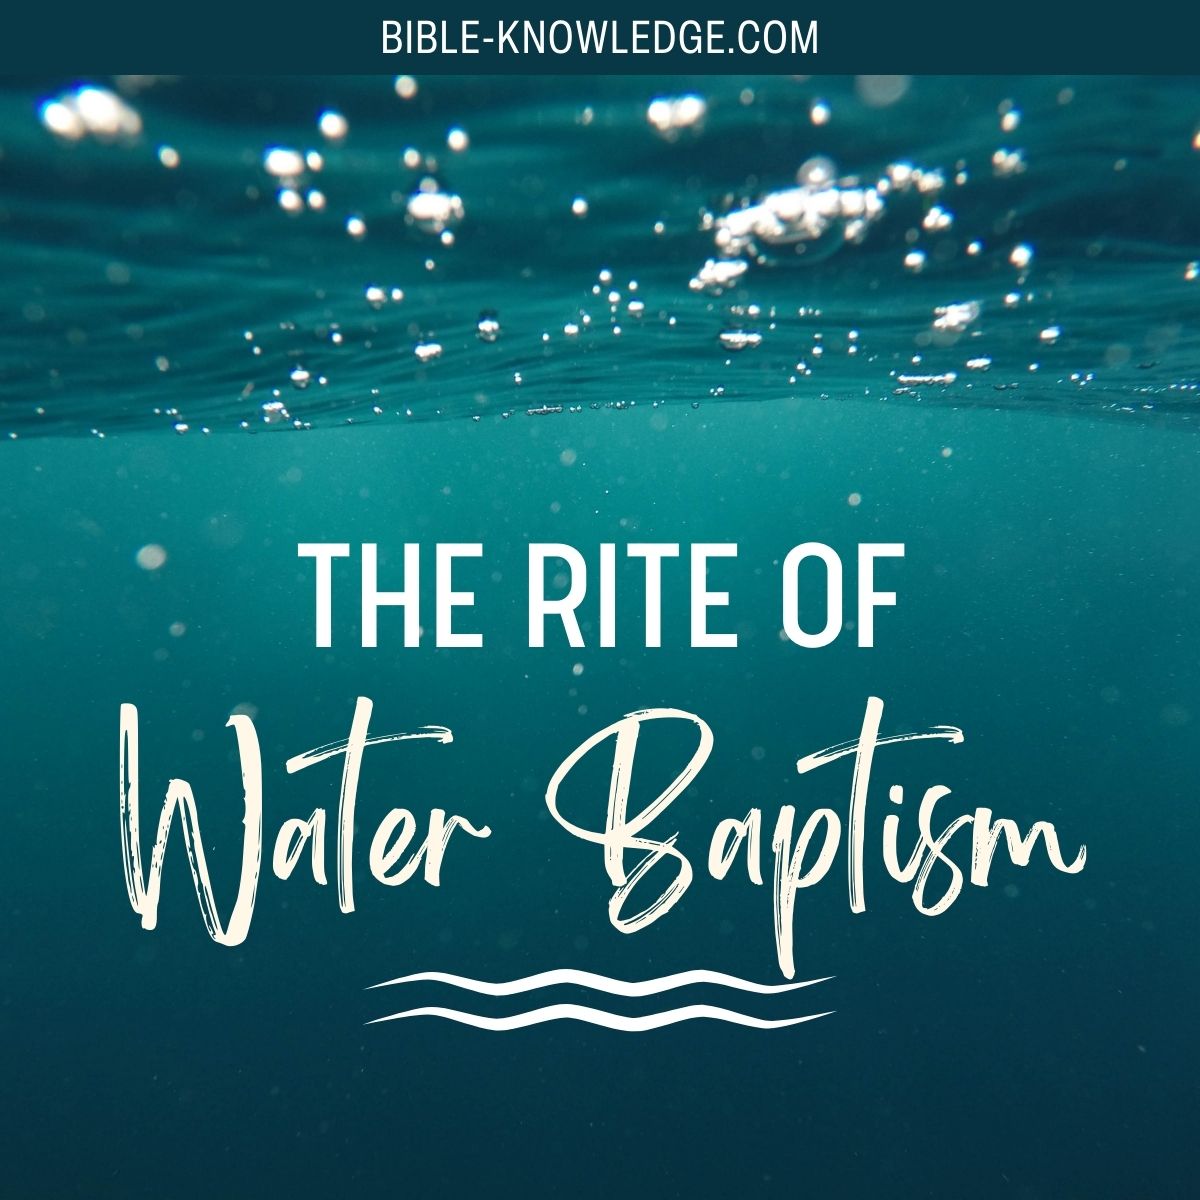 The Rite of Water Baptism